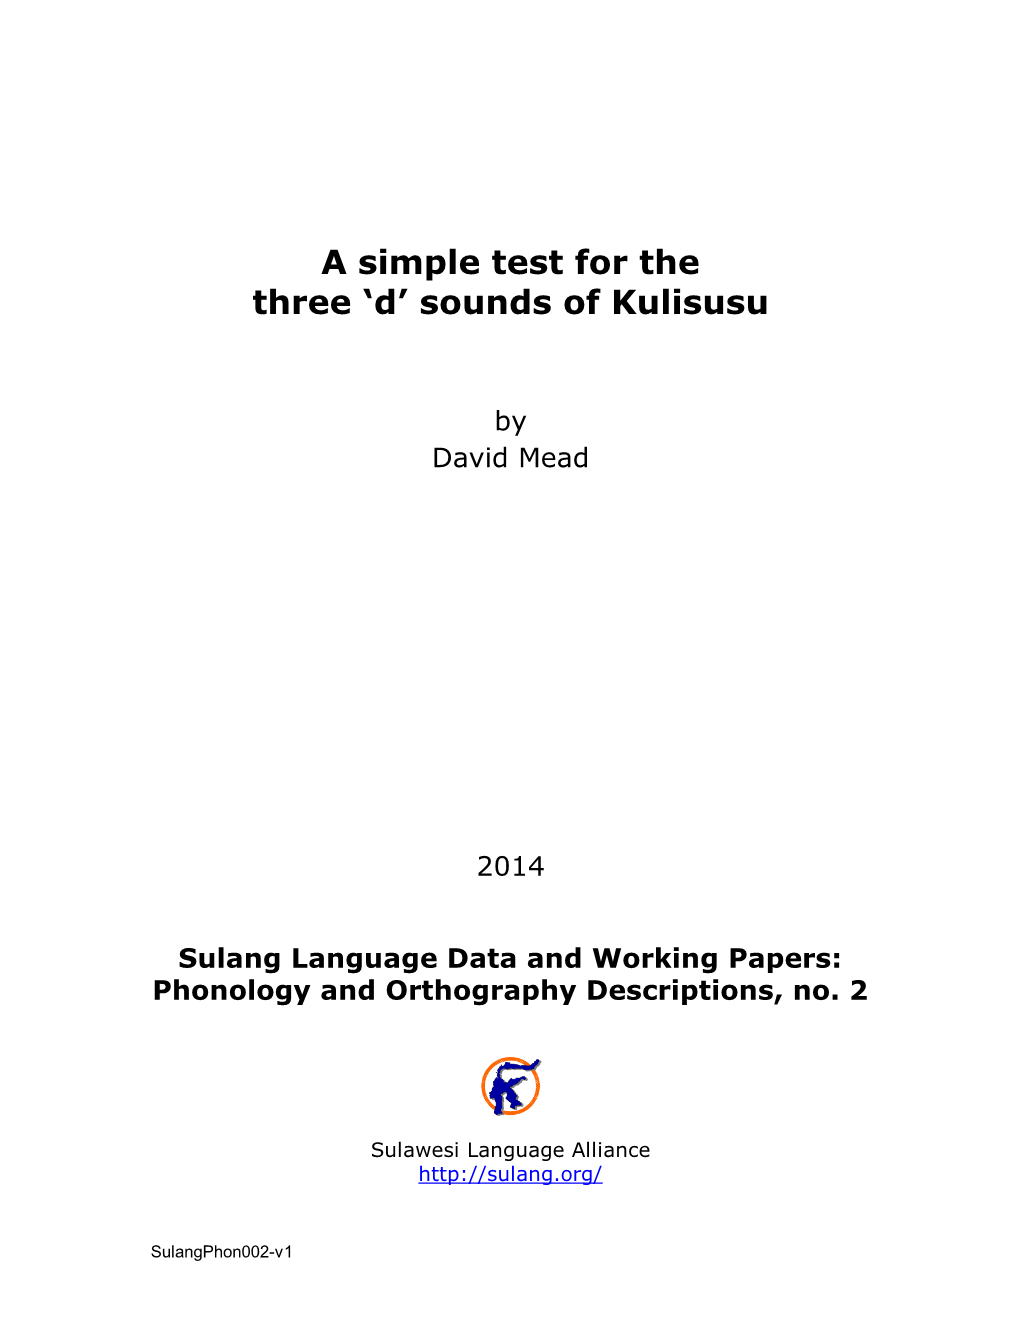 A Simple Test for the Three 'D' Sounds of Kulisusu